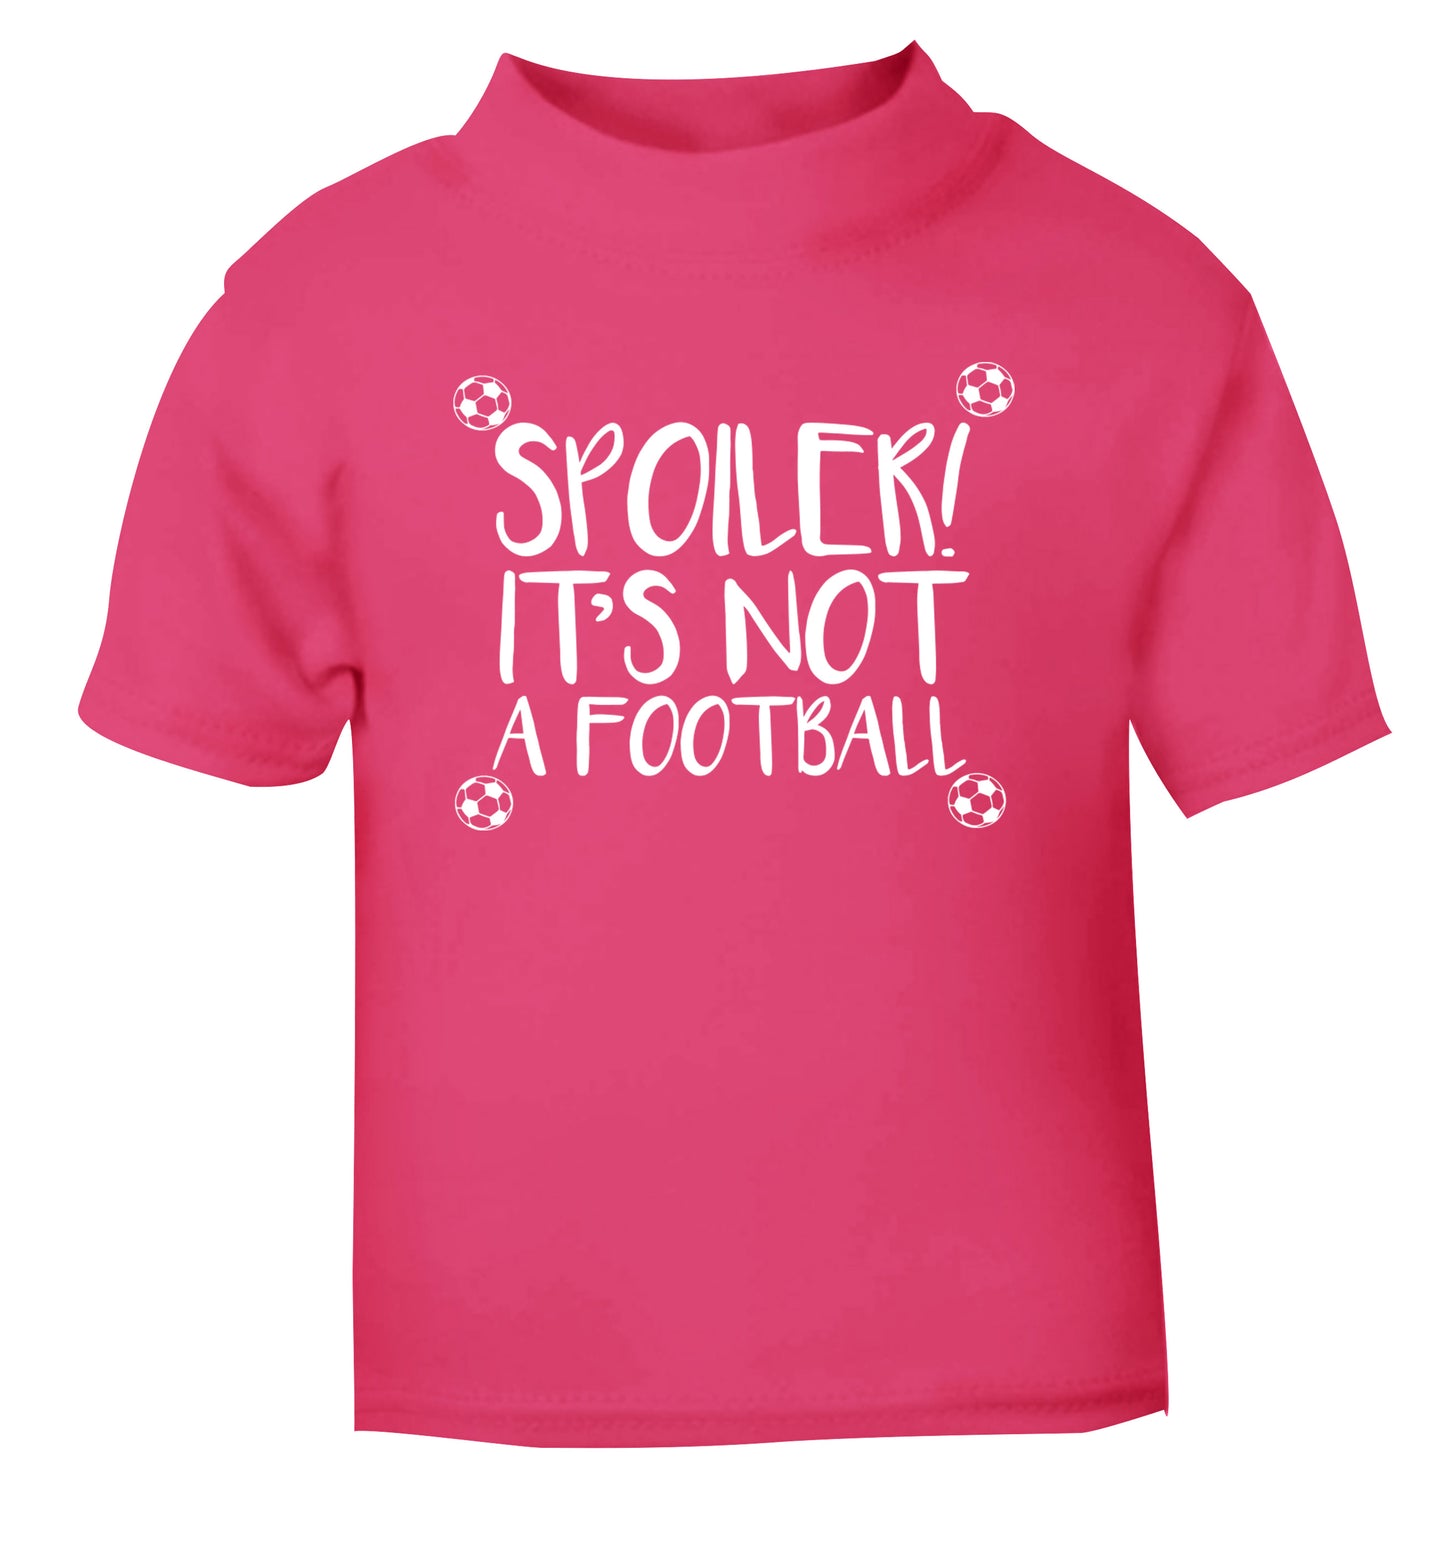 Spoiler it's not a football pink Baby Toddler Tshirt 2 Years